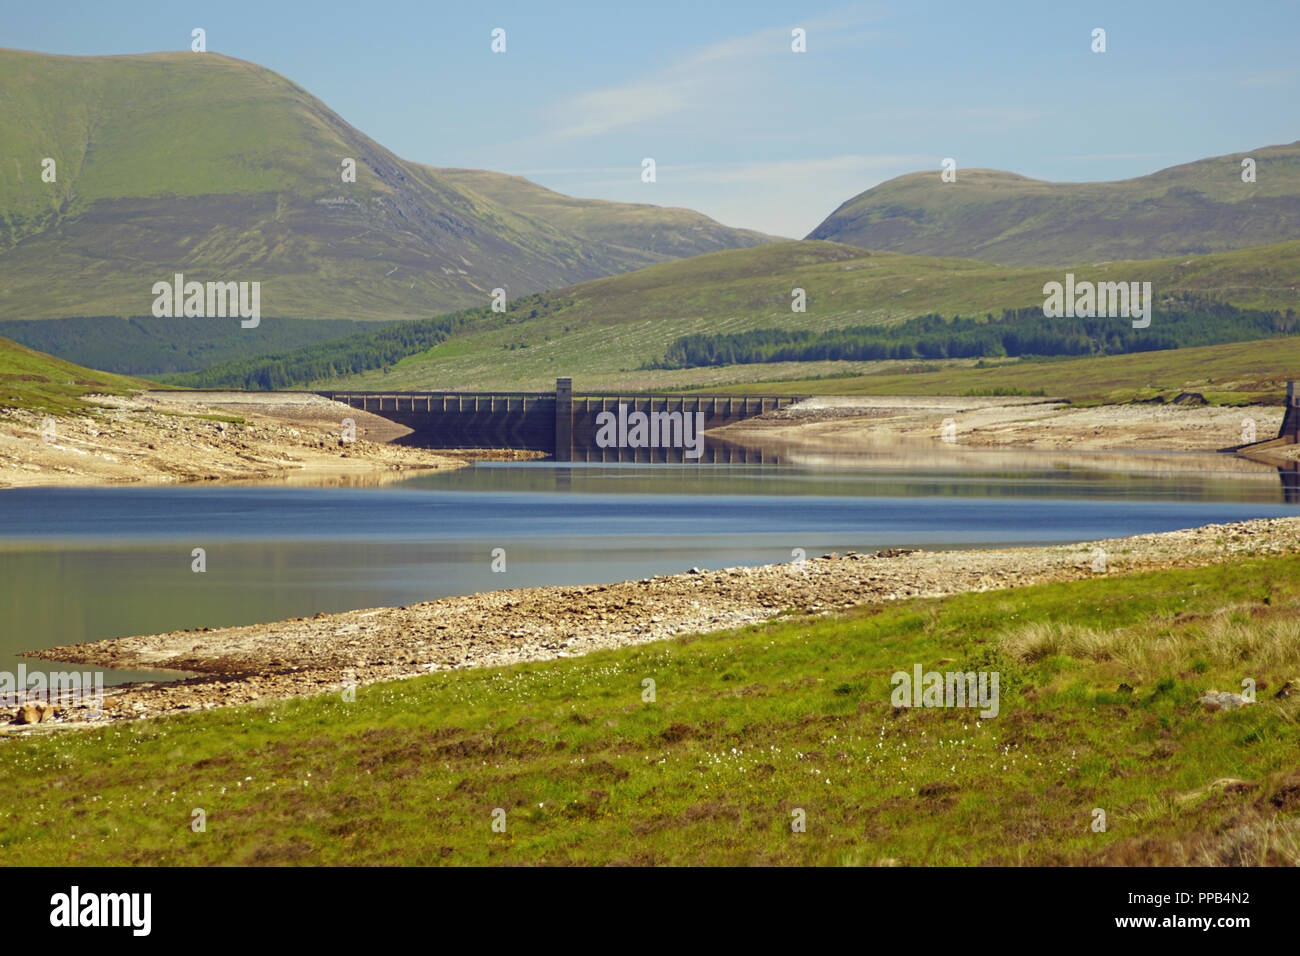 Loch Glascarnoch, a reservoir 7km long, is about halfway between Ullapool and Inverness. Stock Photo